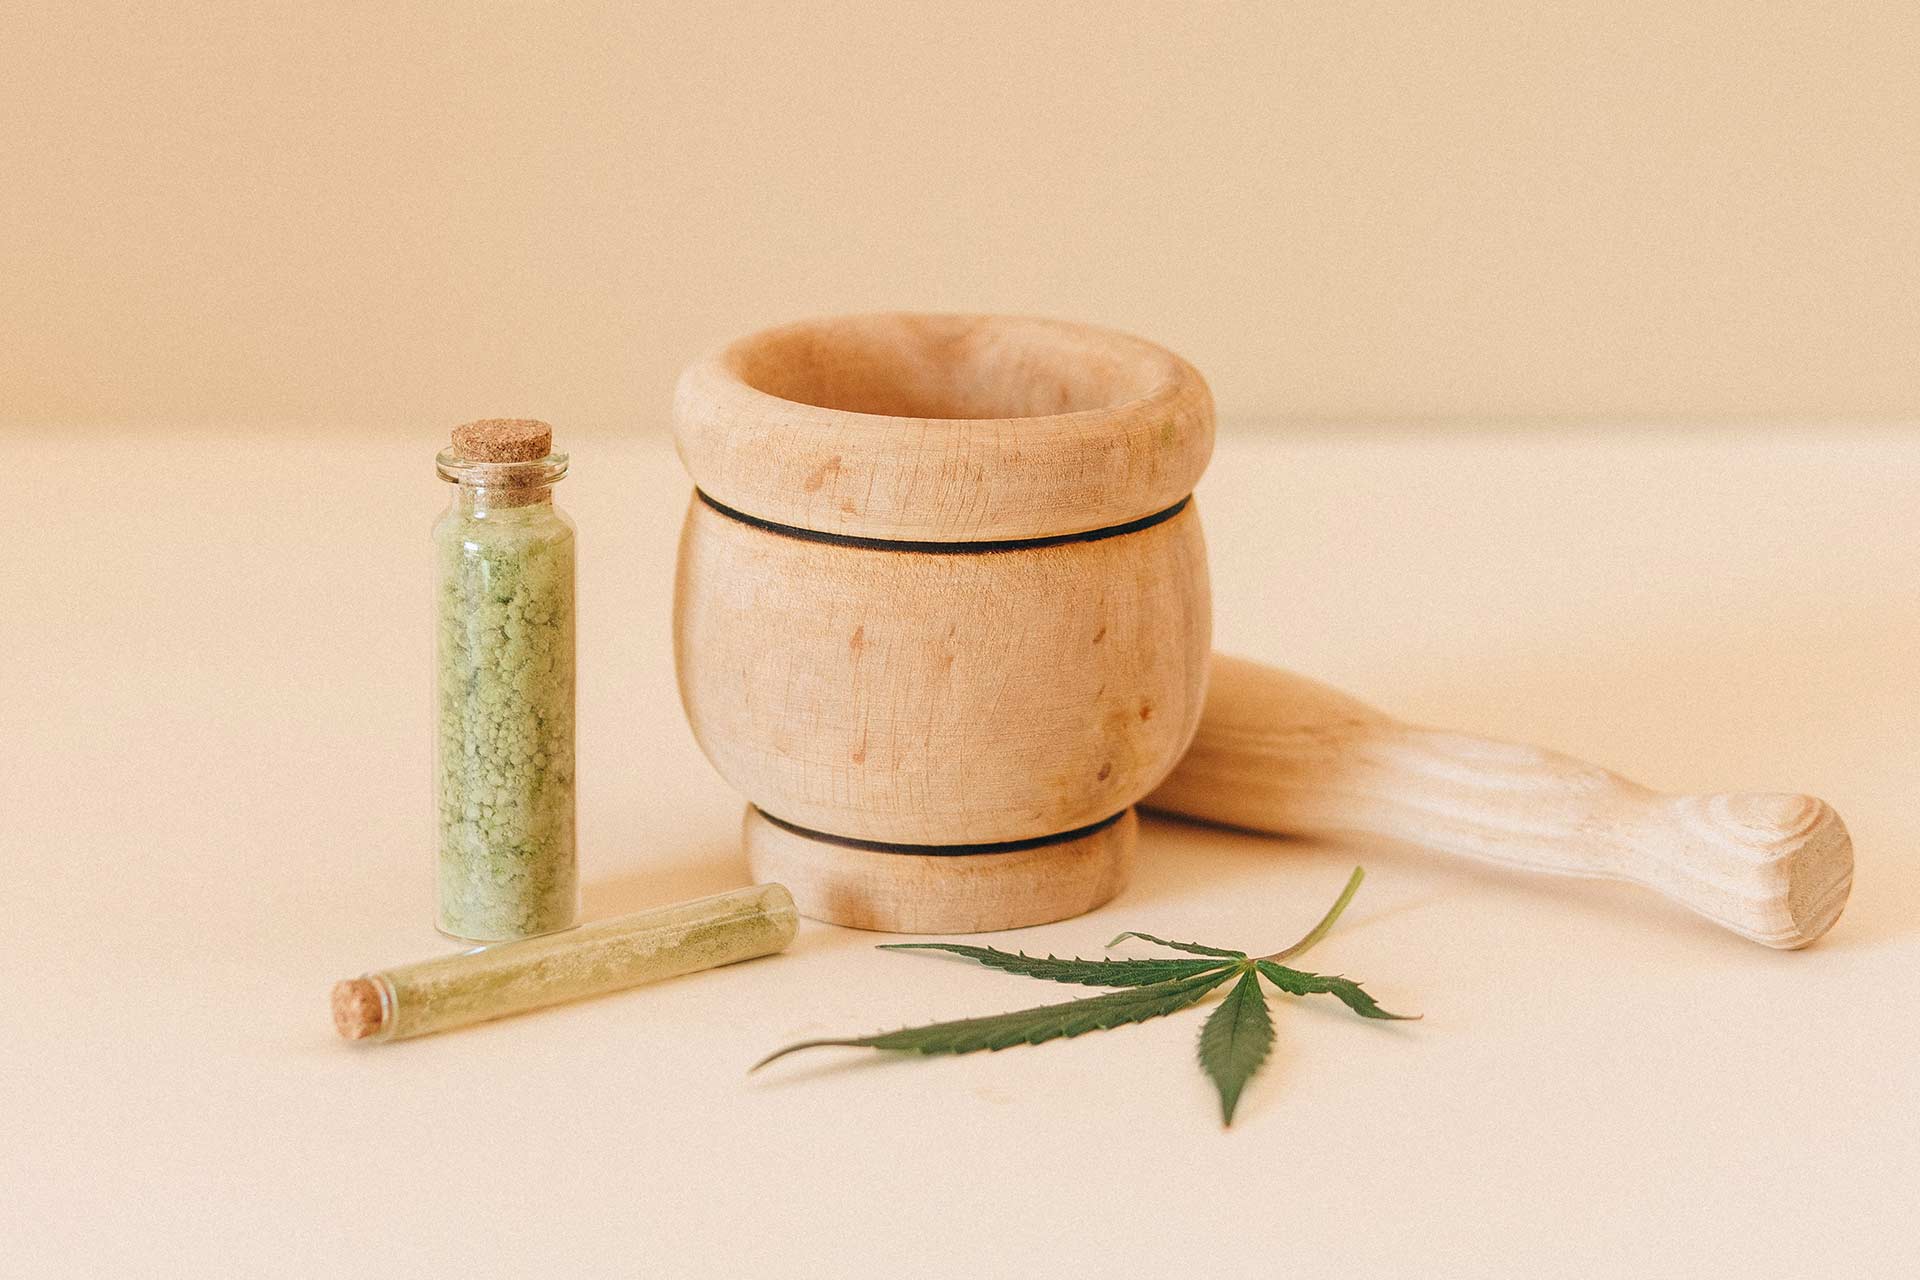 cannabis next to a wooden mortar and pestle